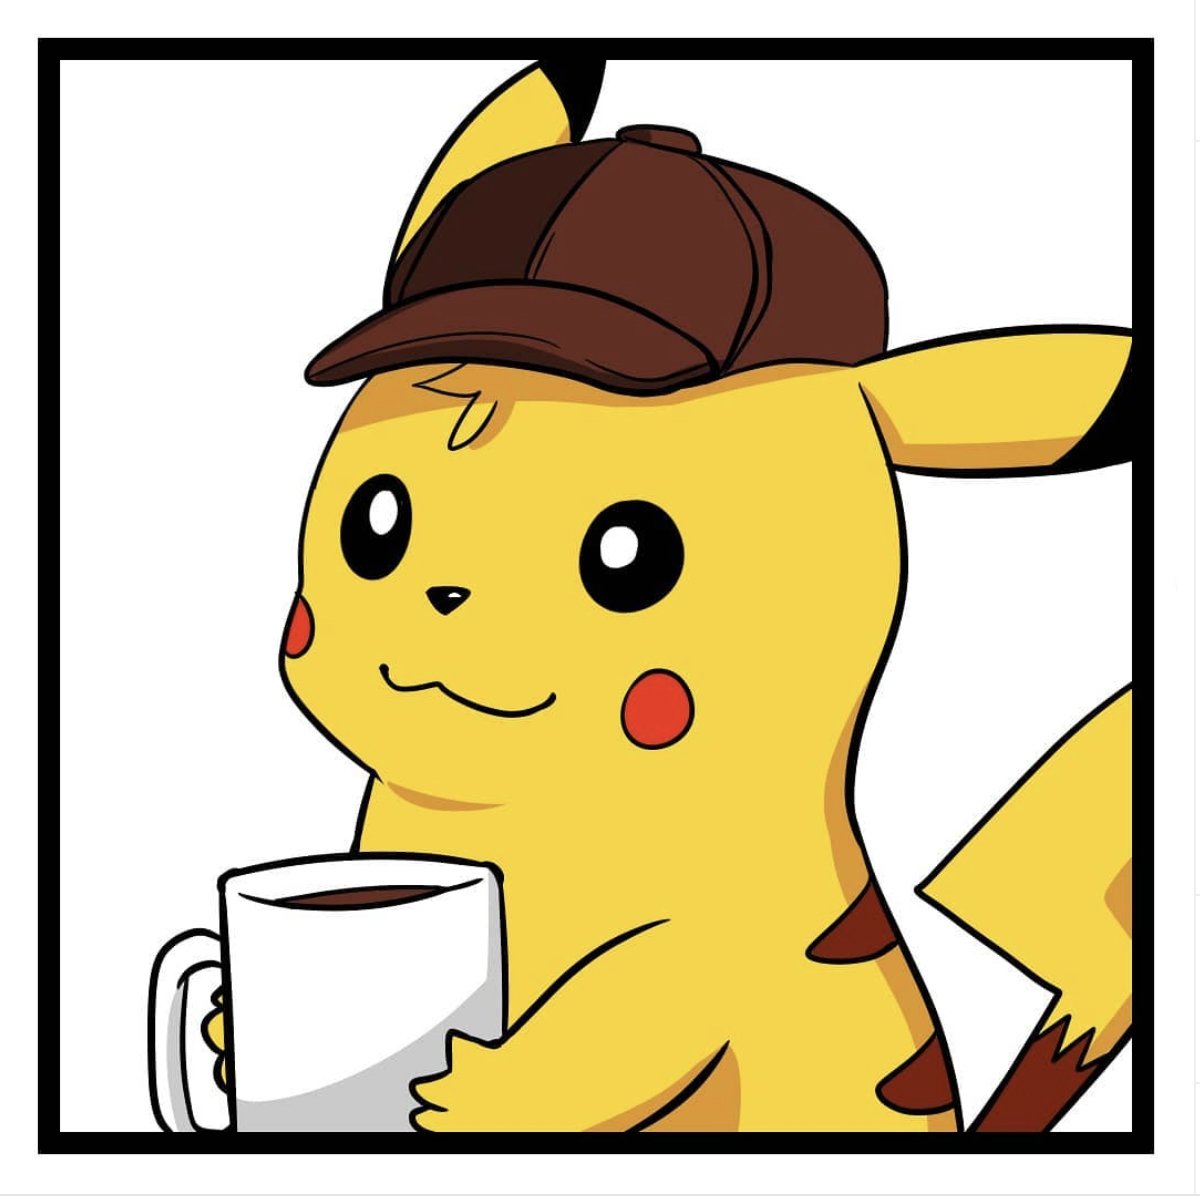 Pokémon Detective Pikachu On Twitter There Is No Such